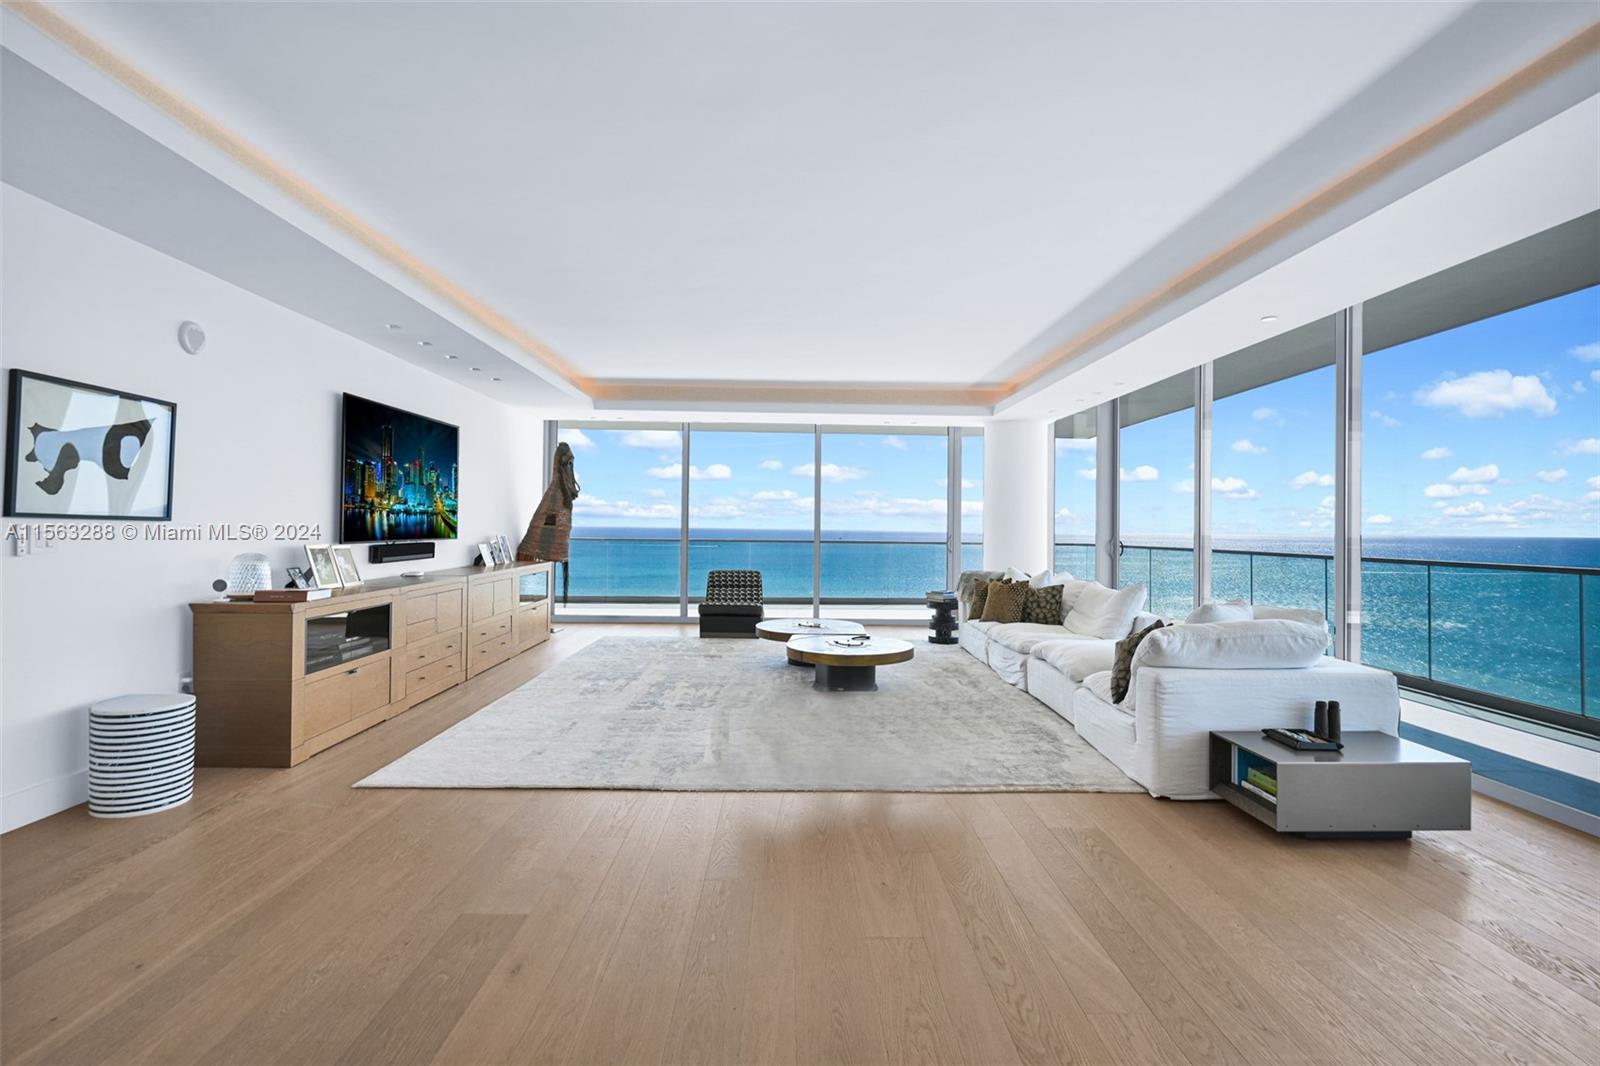 This exceptional high-floor oceanfront residence offers unparalleled views of the glistening Atlantic Ocean and iconic Downtown Miami skyline. Situated on the southeast corner, this flow-through unit showcases a sprawling wrap-around terrace where you can indulge in breathtaking sunrises and sunsets.

With 3 bedrooms and 4.5 bathrooms, luxurious interiors feature ample space for comfortable living. Private elevator entrance ensures exclusivity and convenience, while panoramic views from almost every room create an ambiance of serenity and sophistication.

Experience resort-style living at Oceana with 5-star amenities that include 2 pools, cabanas, full beach service, concierge, spa, clay tennis courts, private restaurant and exceptional art collection.